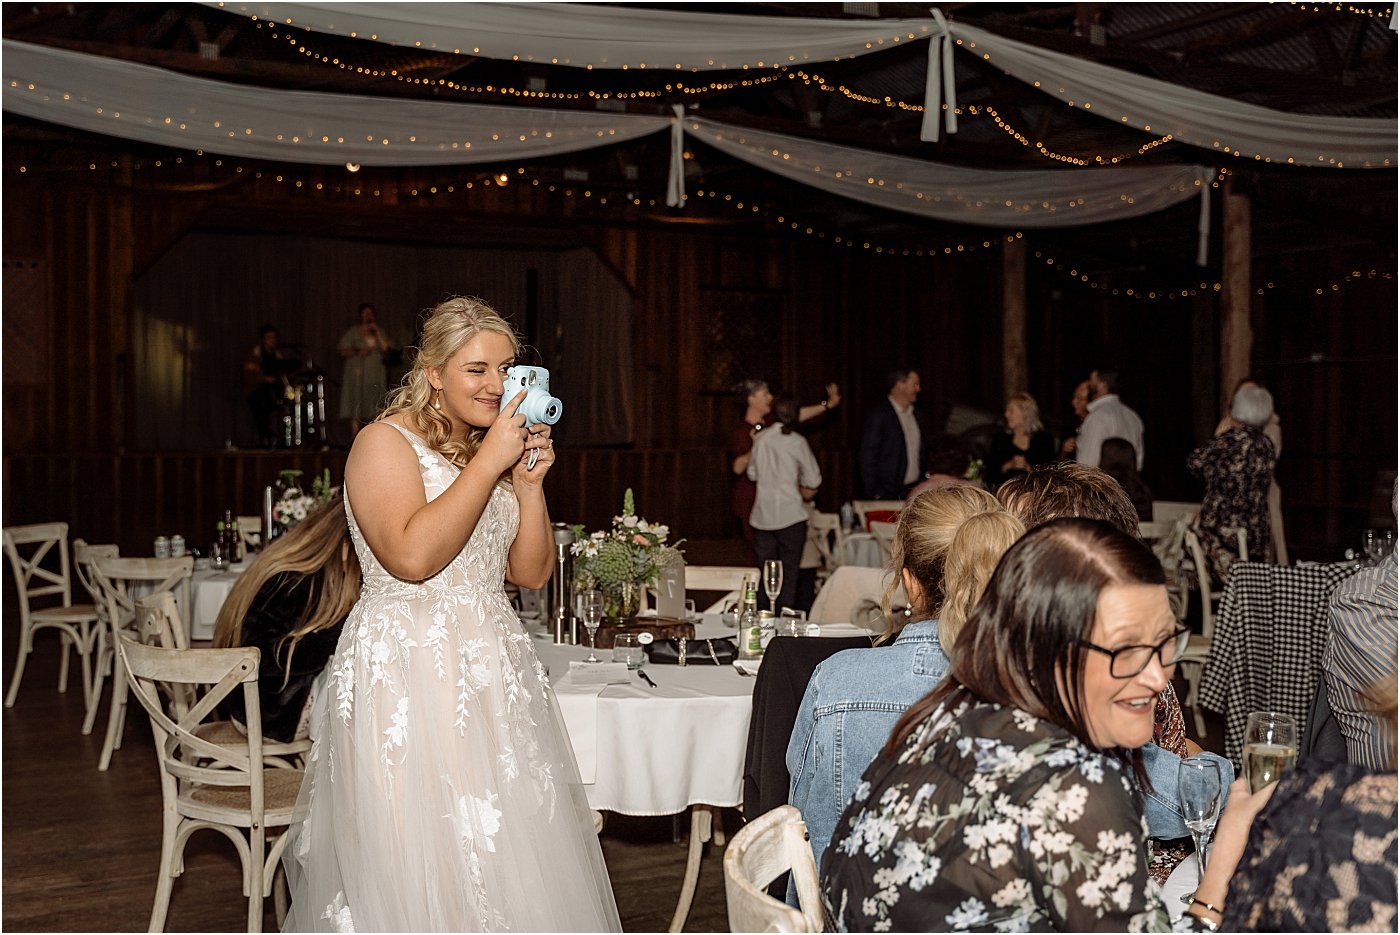 Bride taking an instax photo of her guests at her wedding